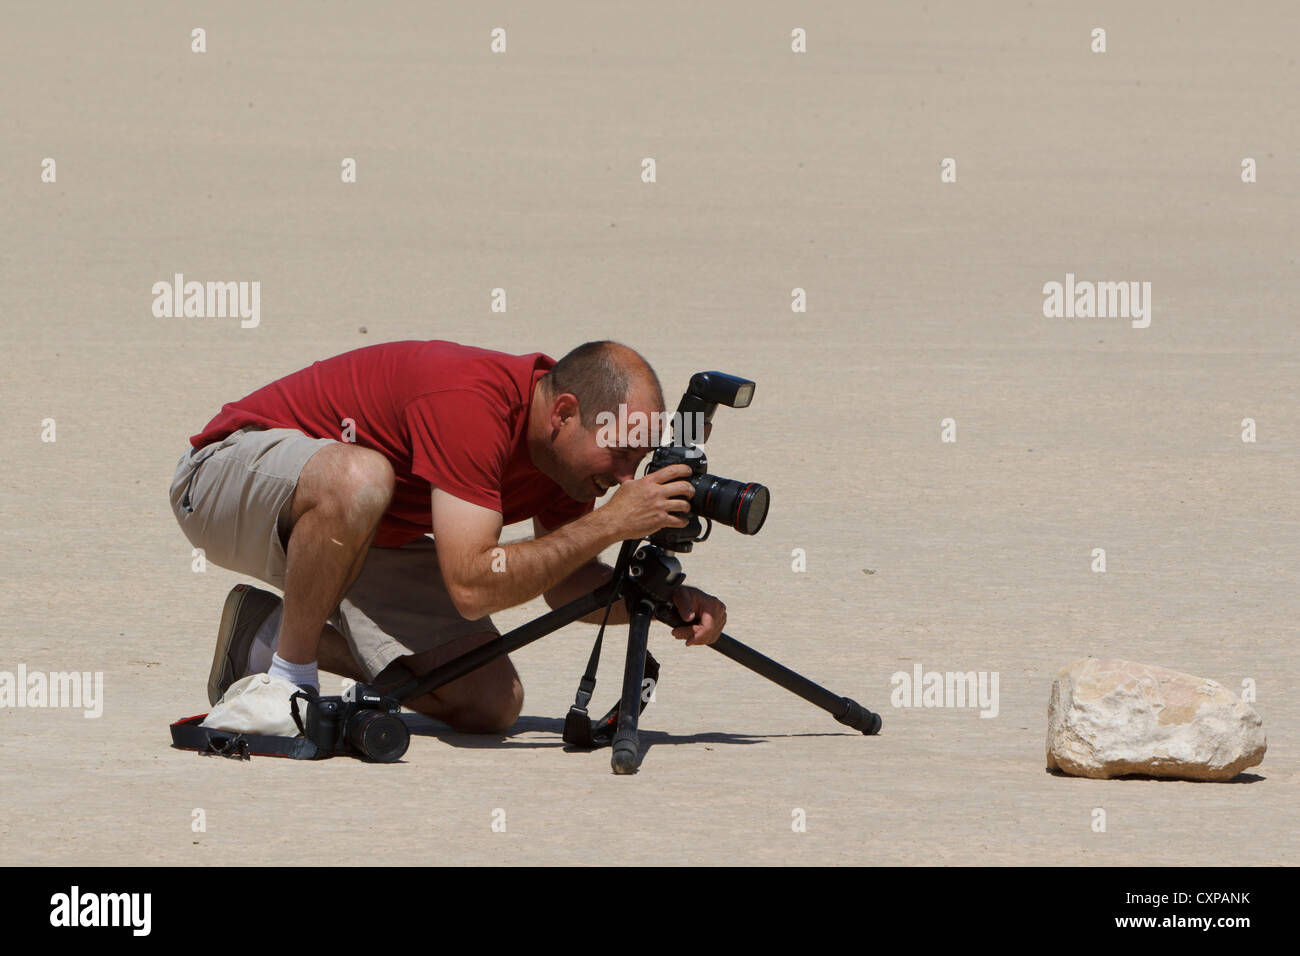 Adult male photographer taking pictures moving rock Racetrack Playa Death Valley National Park California United States America Stock Photo